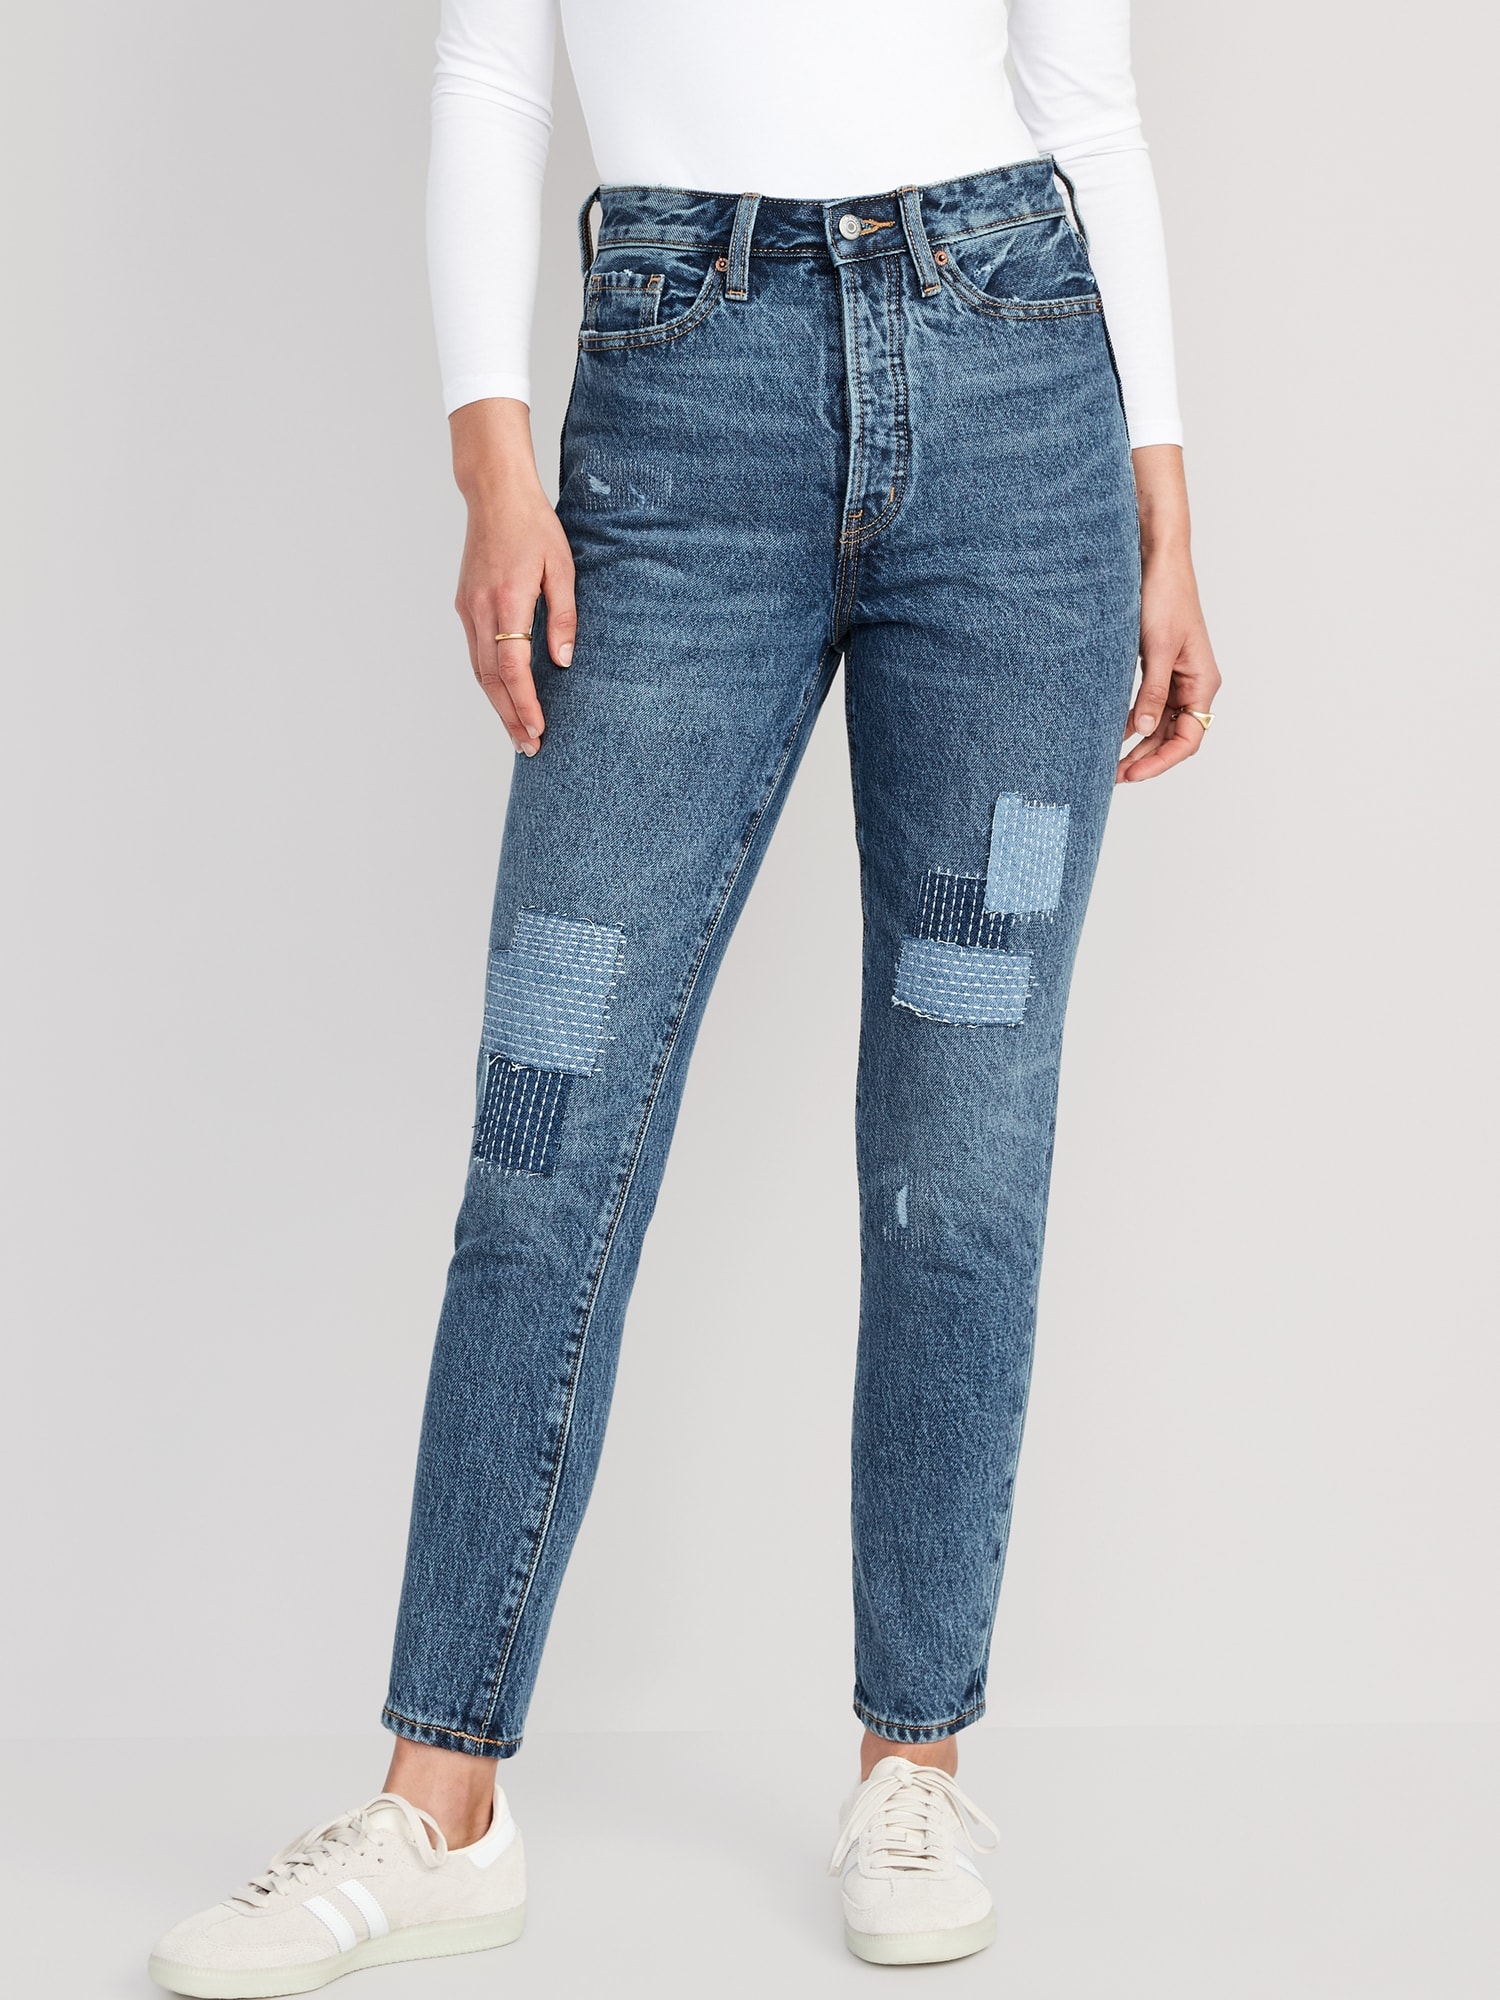 Old Navy Higher High-Waisted Button-Fly OG Straight Patchwork Non-Stretch Jeans for Women blue. 1